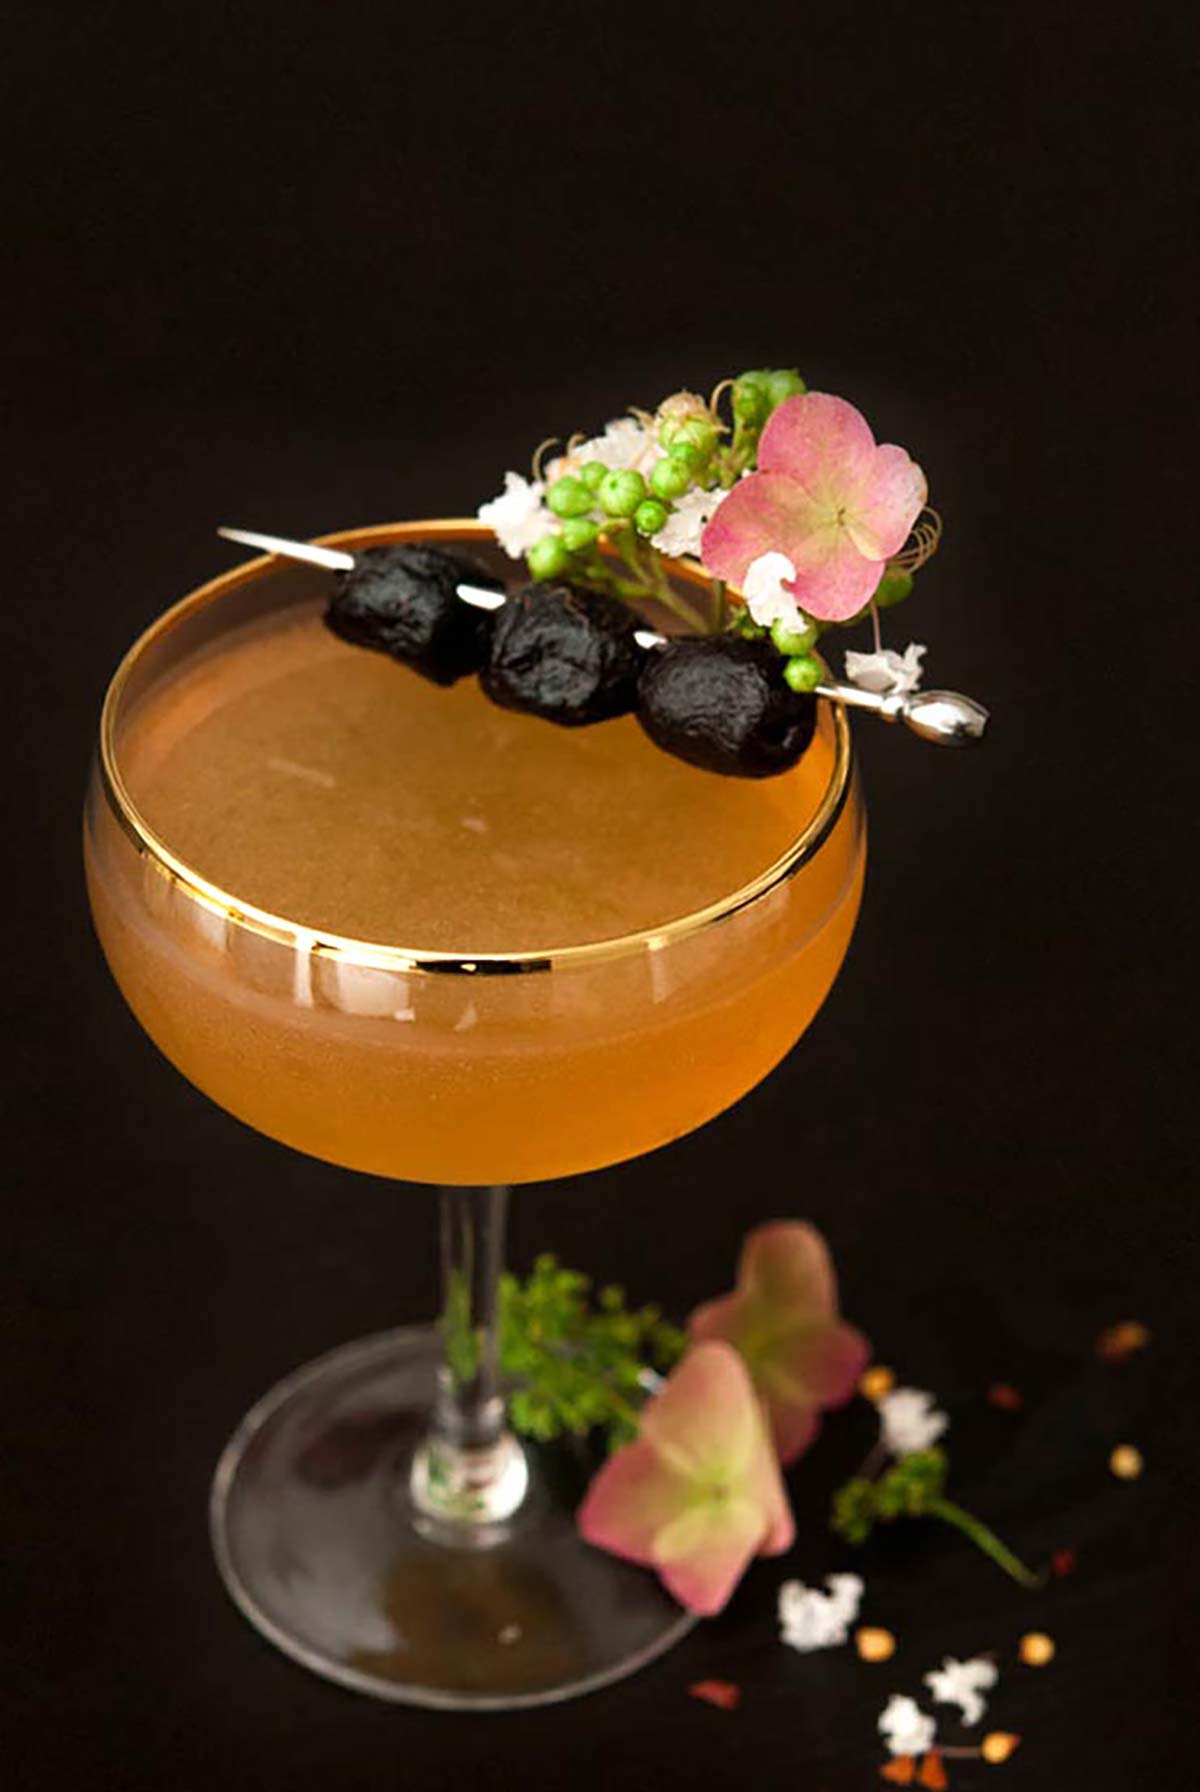 A cocktail on a black table, garnished with small flowers and 3 olives.